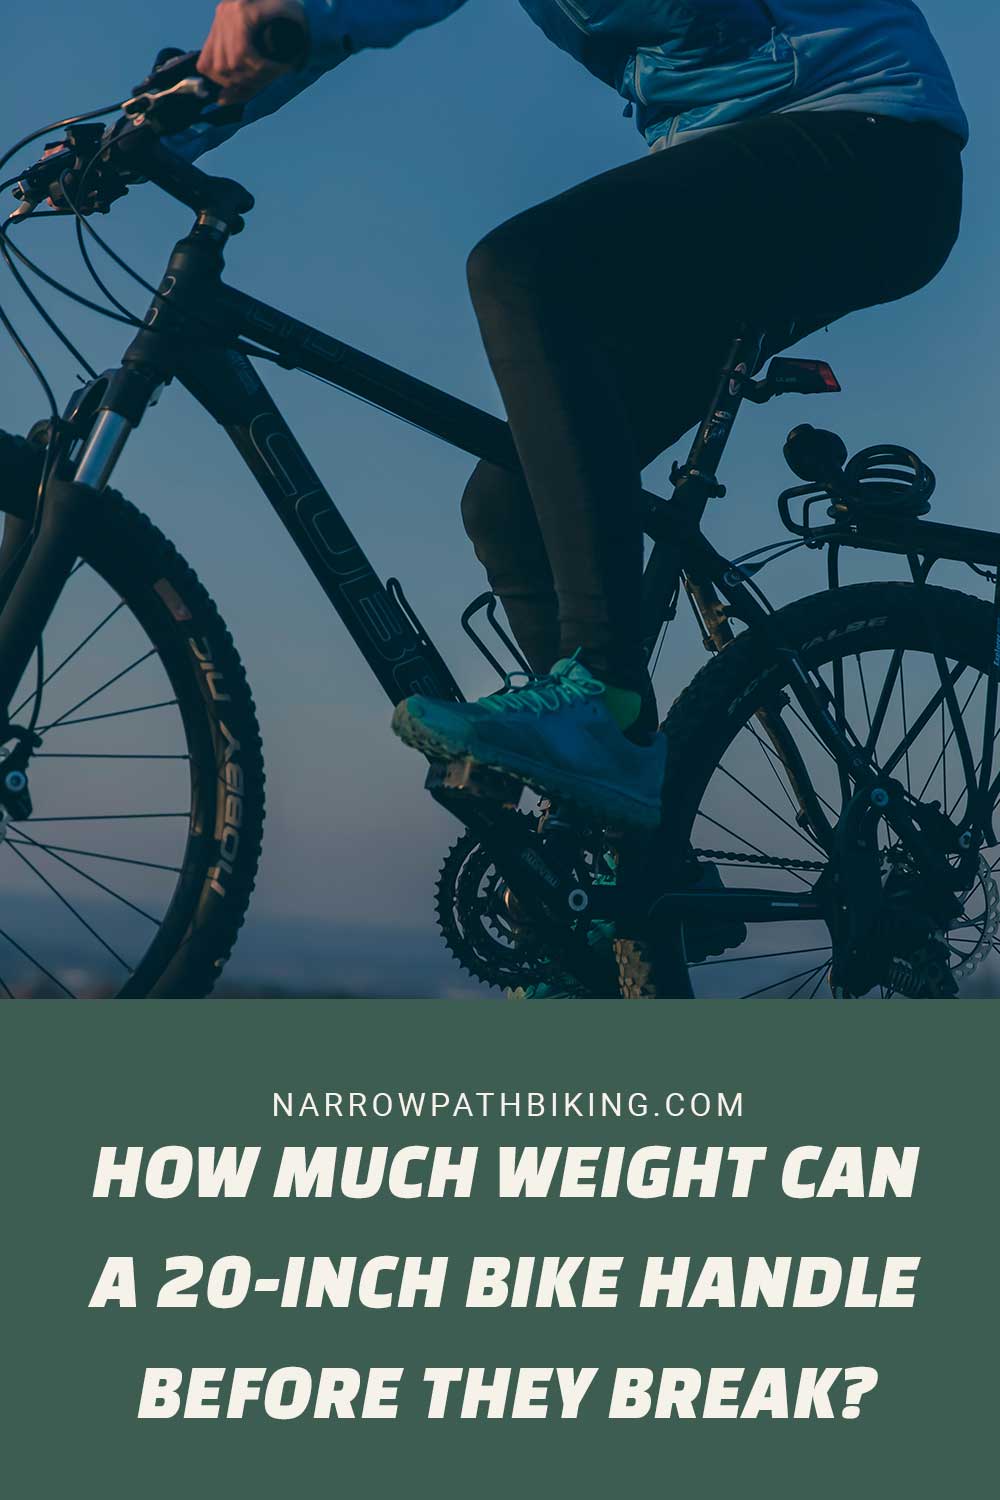 How Much Weight Can A 20-Inch Bike Handle Before They Break?